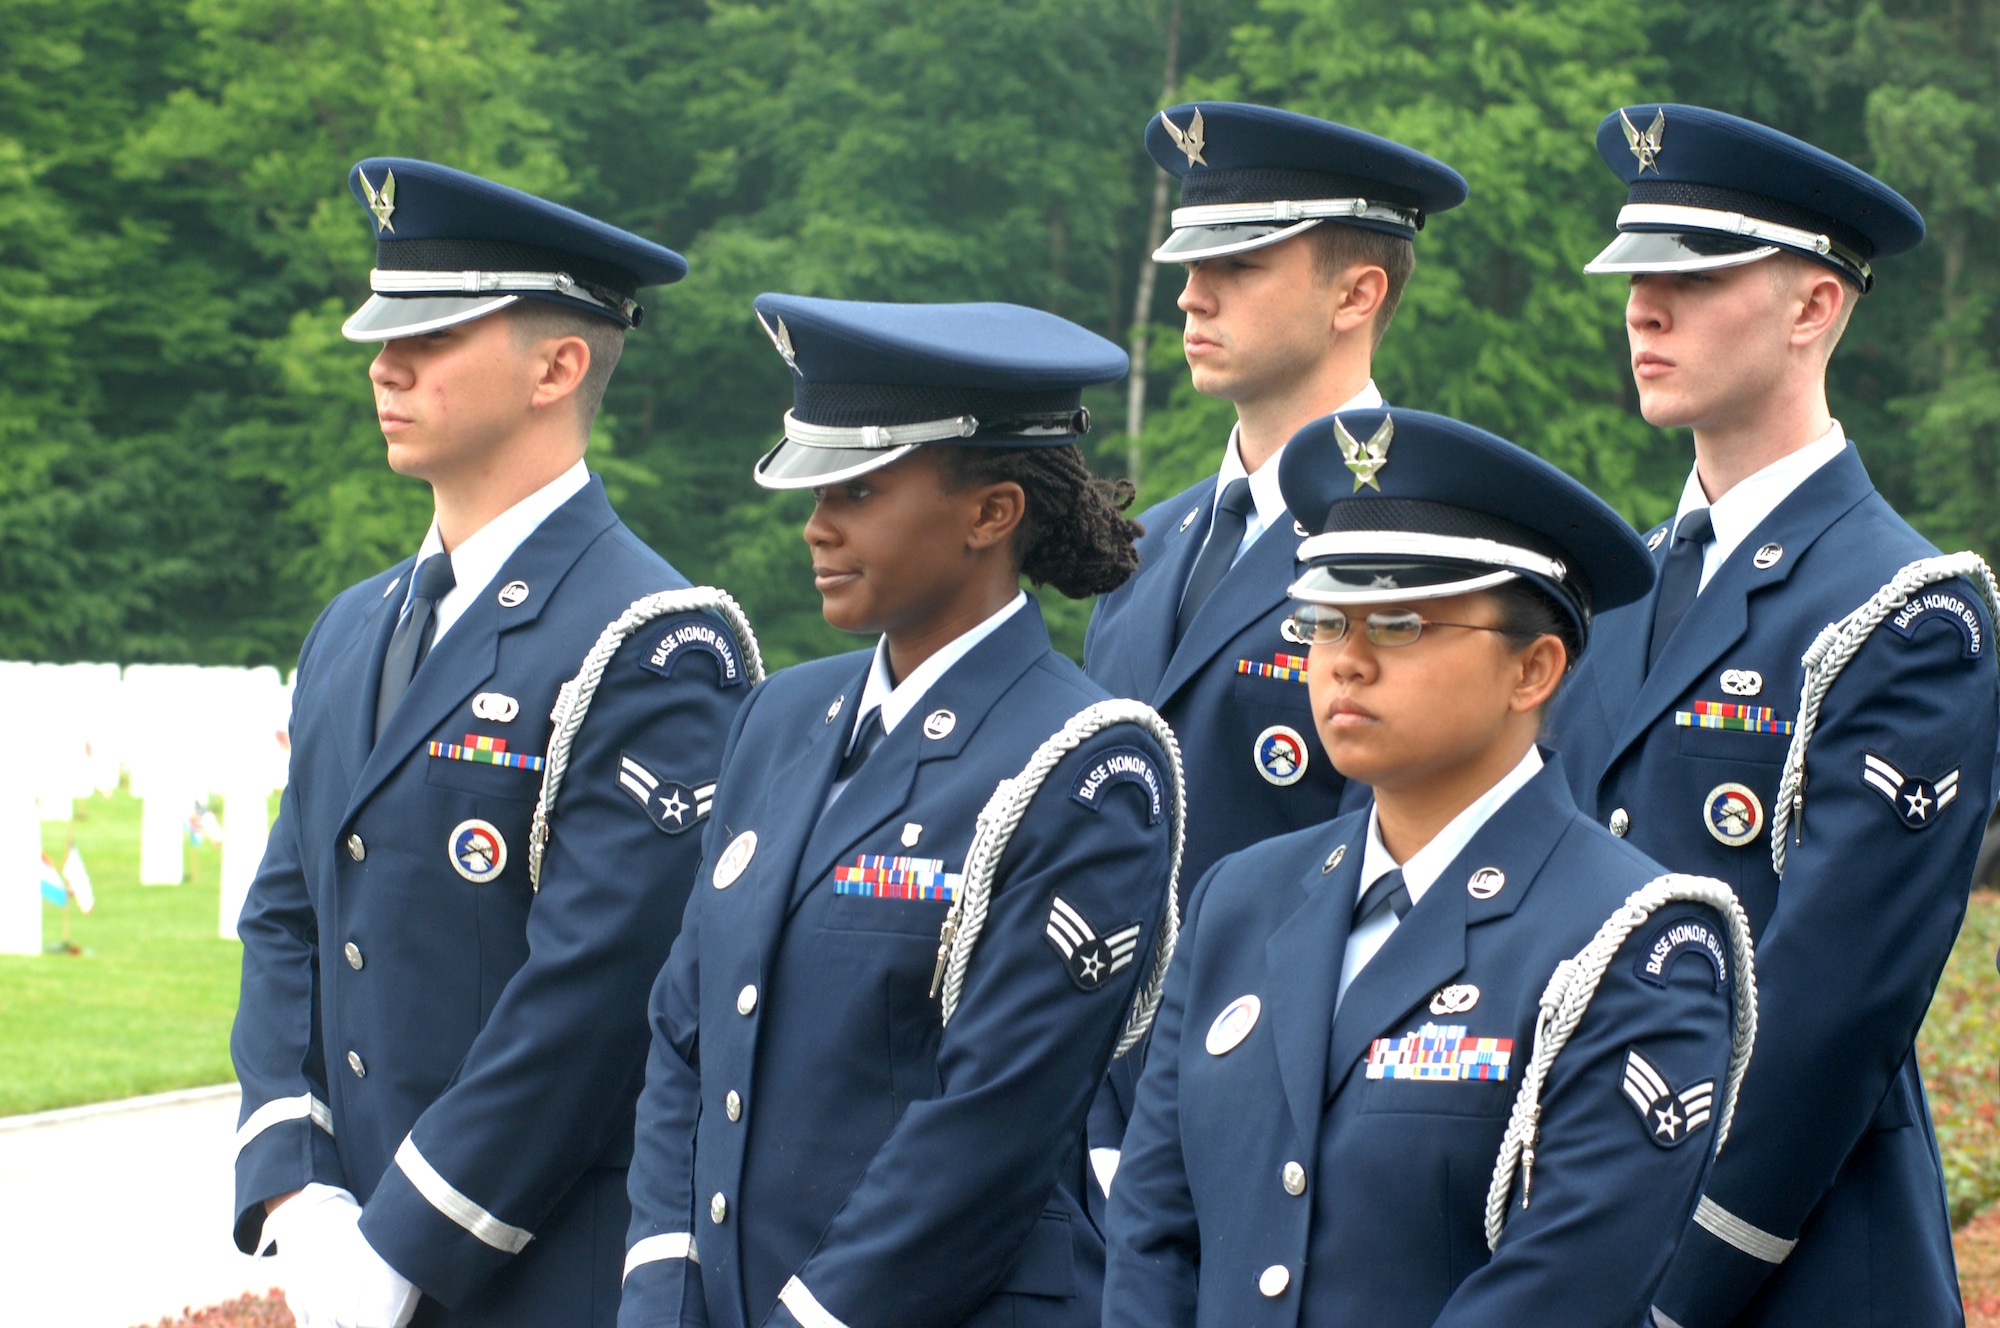 LUXEMBOURG CITY, Luxembourg – Airmen of the 52nd Fighter Wing Honor Guard stand in formation during a Memorial Day ceremony at the Luxembourg American Cemetery and Memorial May 24, 2008. The cemetery contains the remains of 5,076 American servicemembers from all 50 states and the District of Columbia. (U.S. Air Force photo by Staff Sgt. Logan Tuttle)